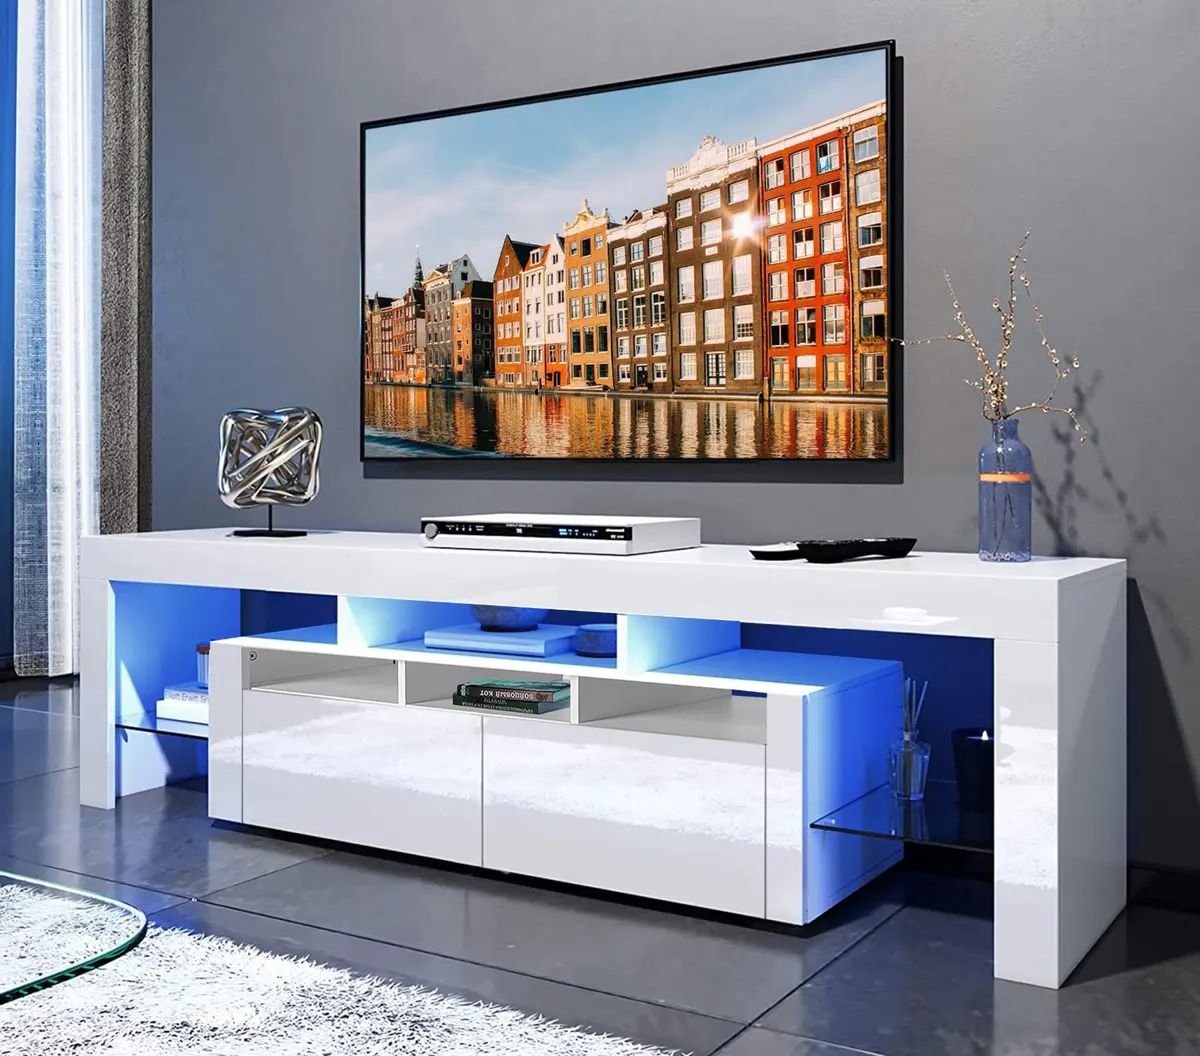 Modern Tv Unit Cabinet White Led Tv Stand High Gloss Doors Living Room Rgb  Light | Ebay Intended For Rgb Tv Entertainment Centers (Gallery 4 of 20)